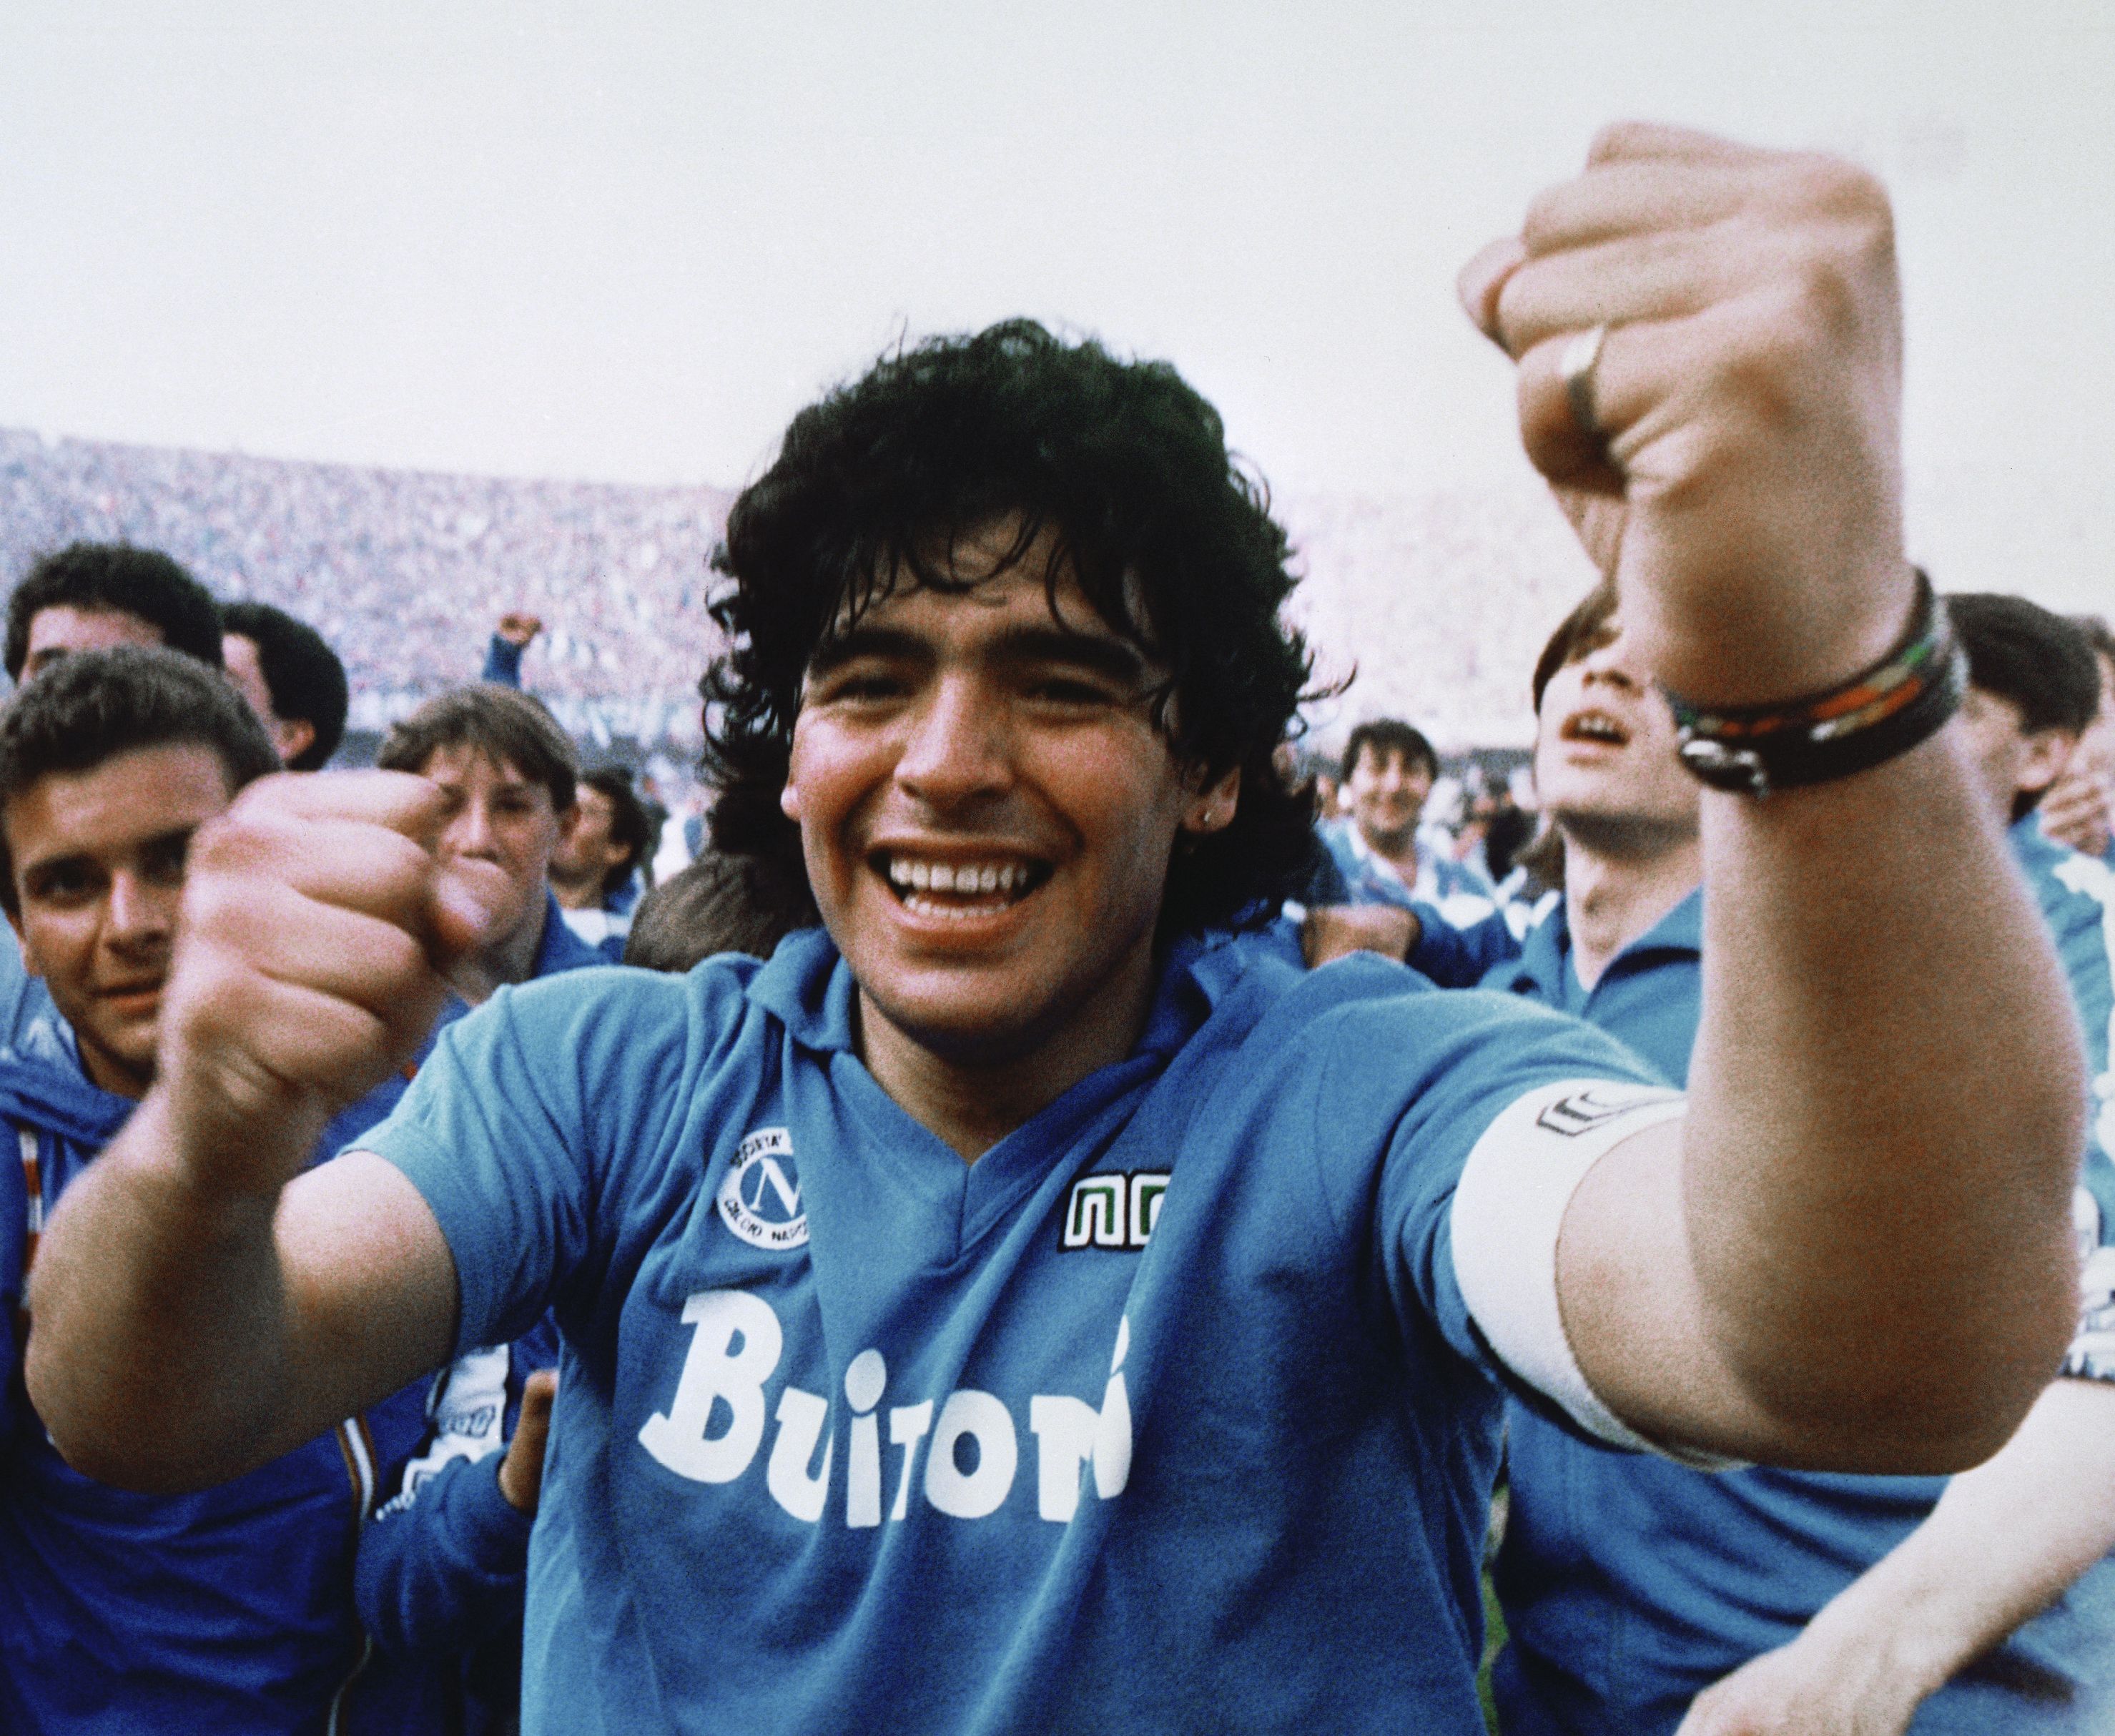 Argentine soccer star Diego Maradona, famous for his 'Hand of God' goal, dies at 60